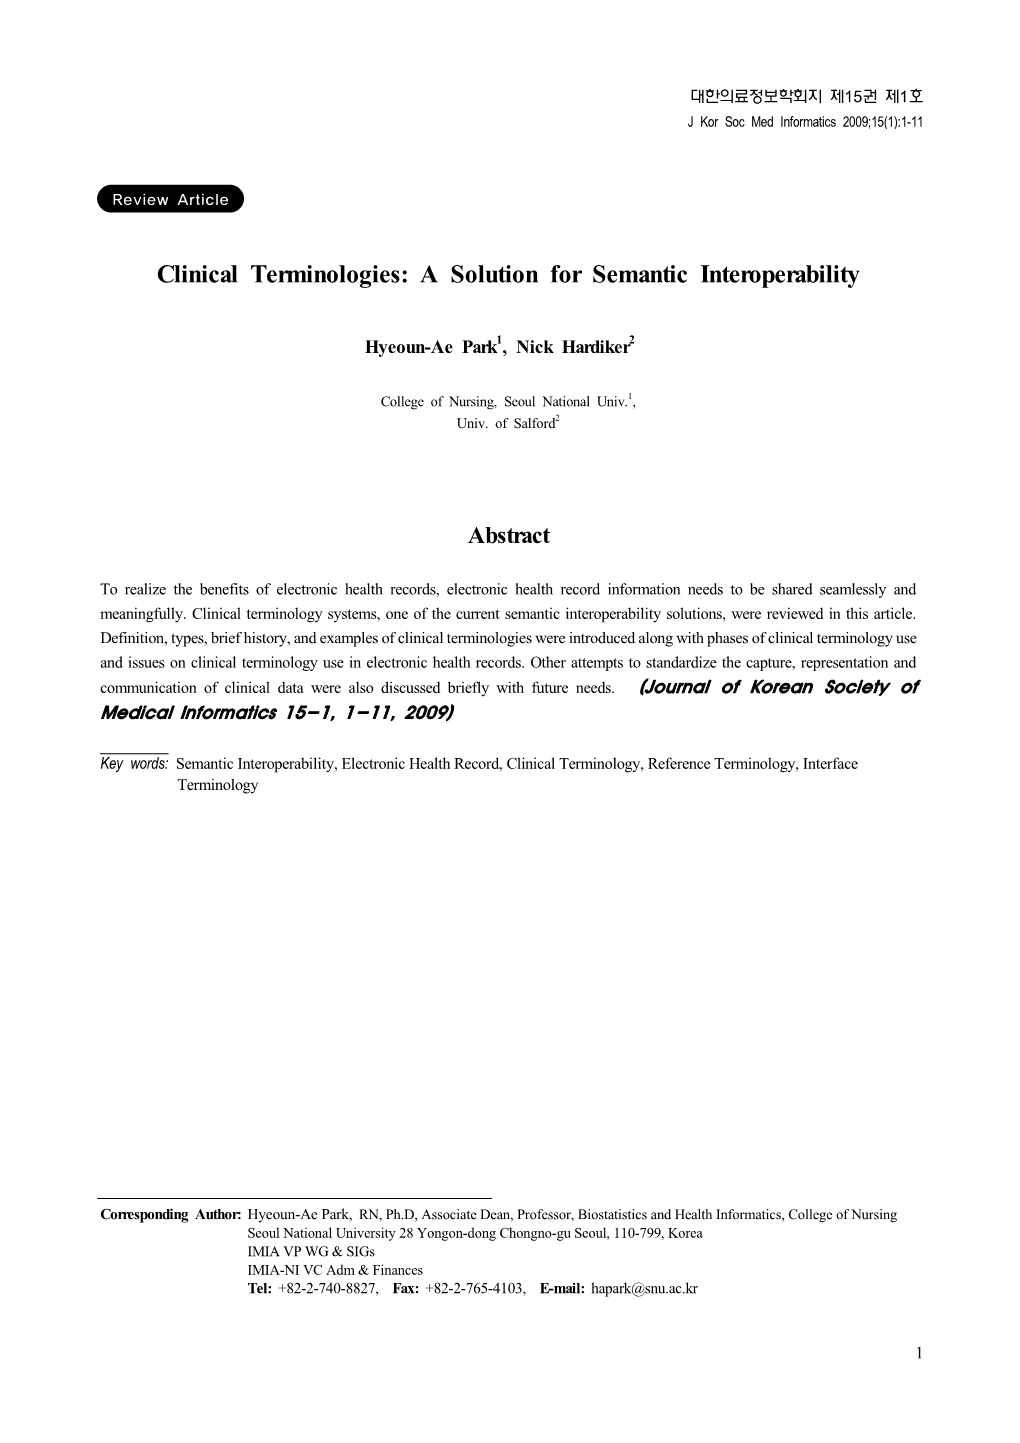 Clinical Terminologies: a Solution for Semantic Interoperability